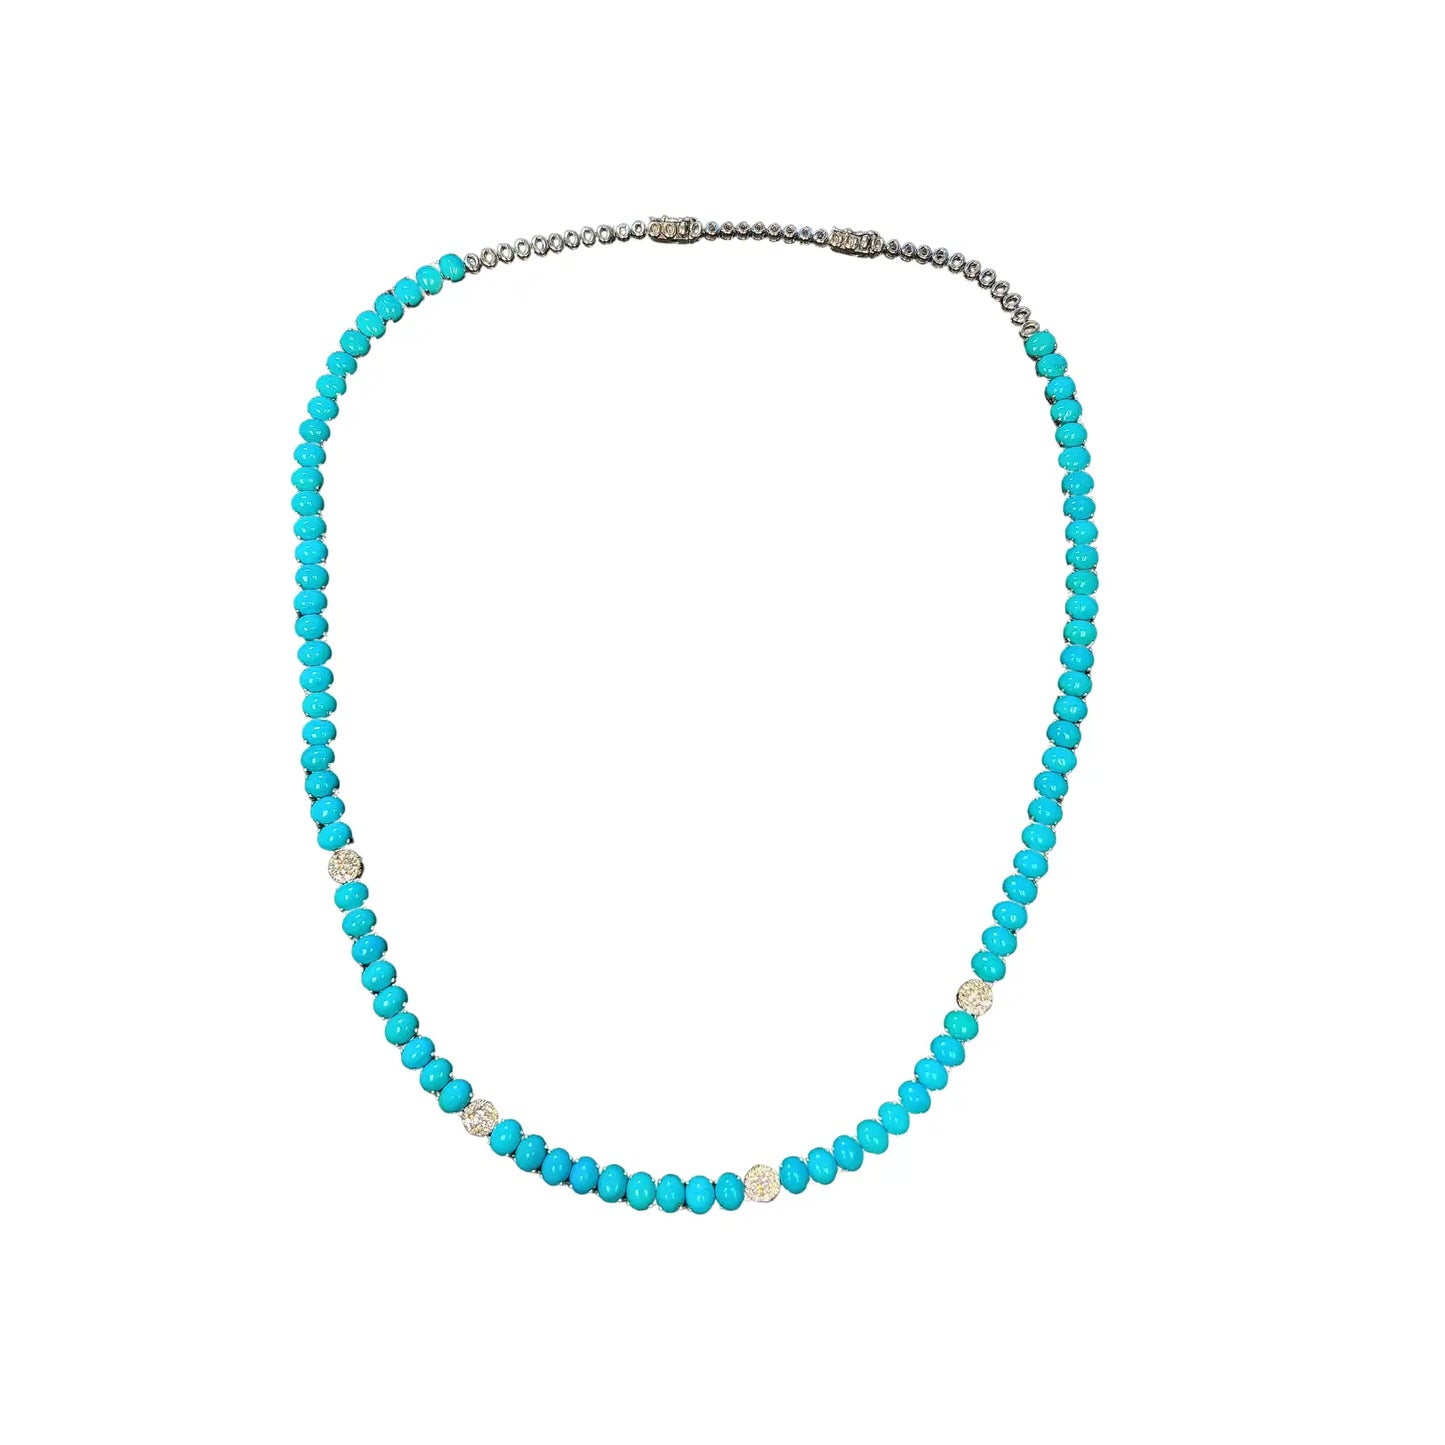 Turquoise and Diamonds Necklace Princess Jewelry Shop